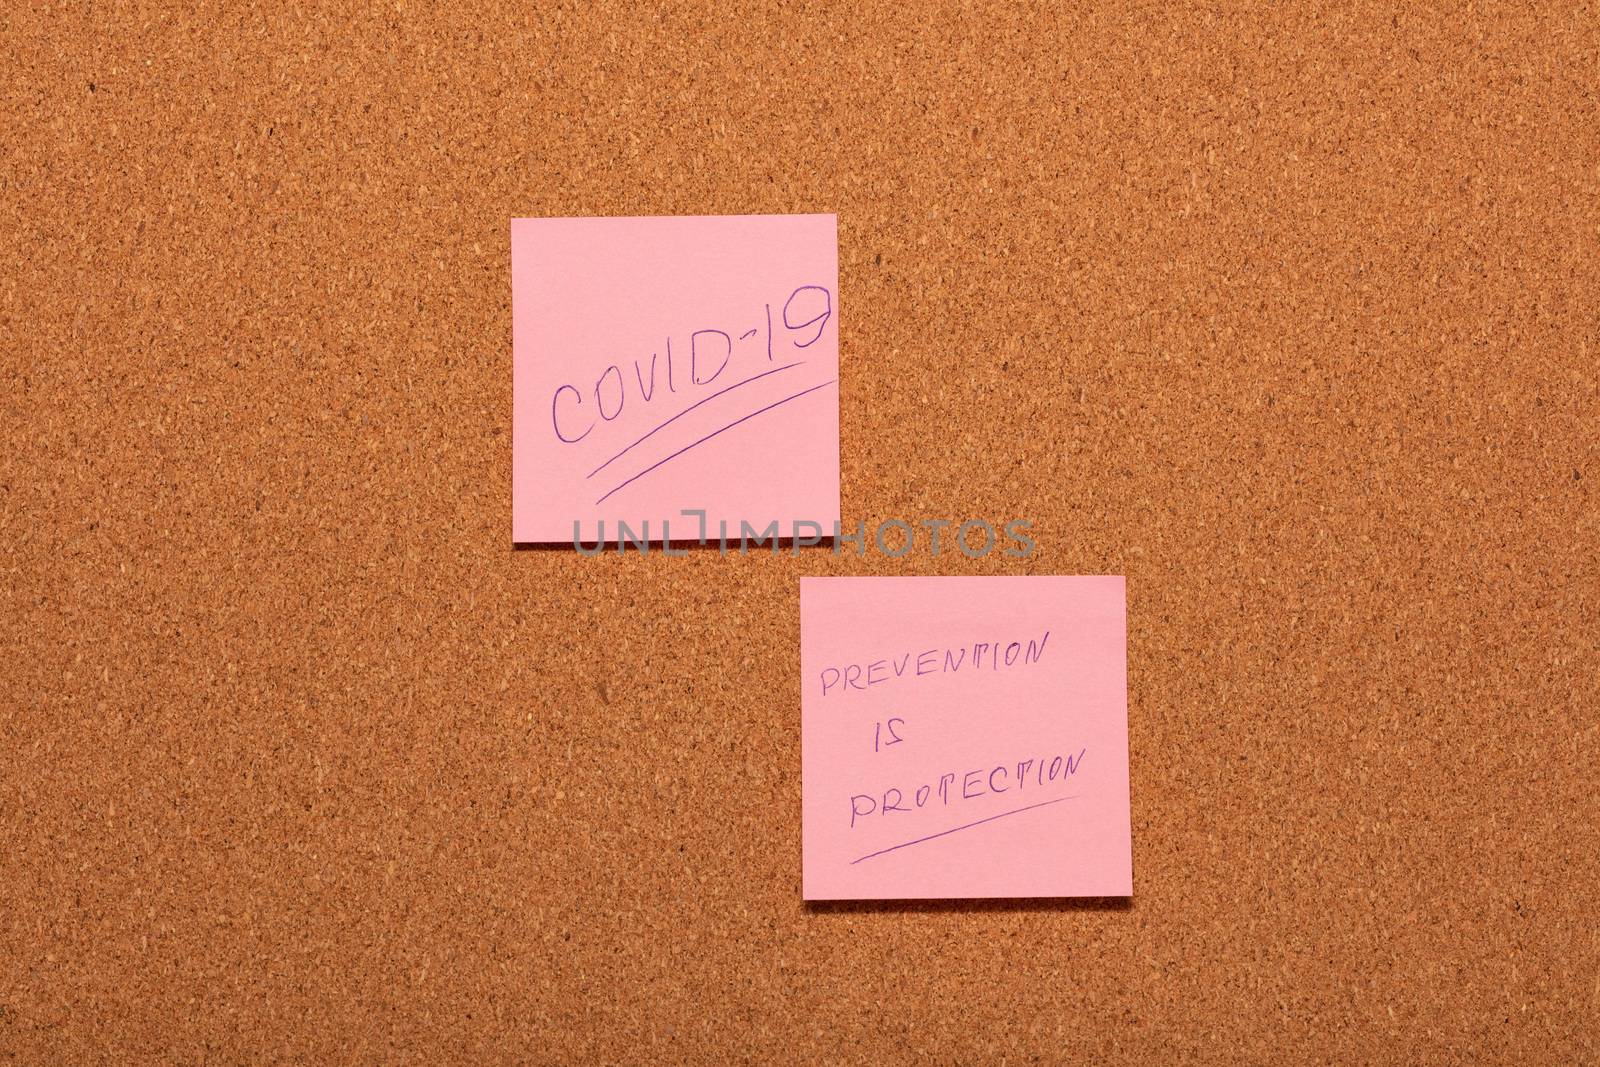 Covid-19 and Prevention is Protection handwritten on two pink stickers on a cork notice-board. Healthcare and social concepts.